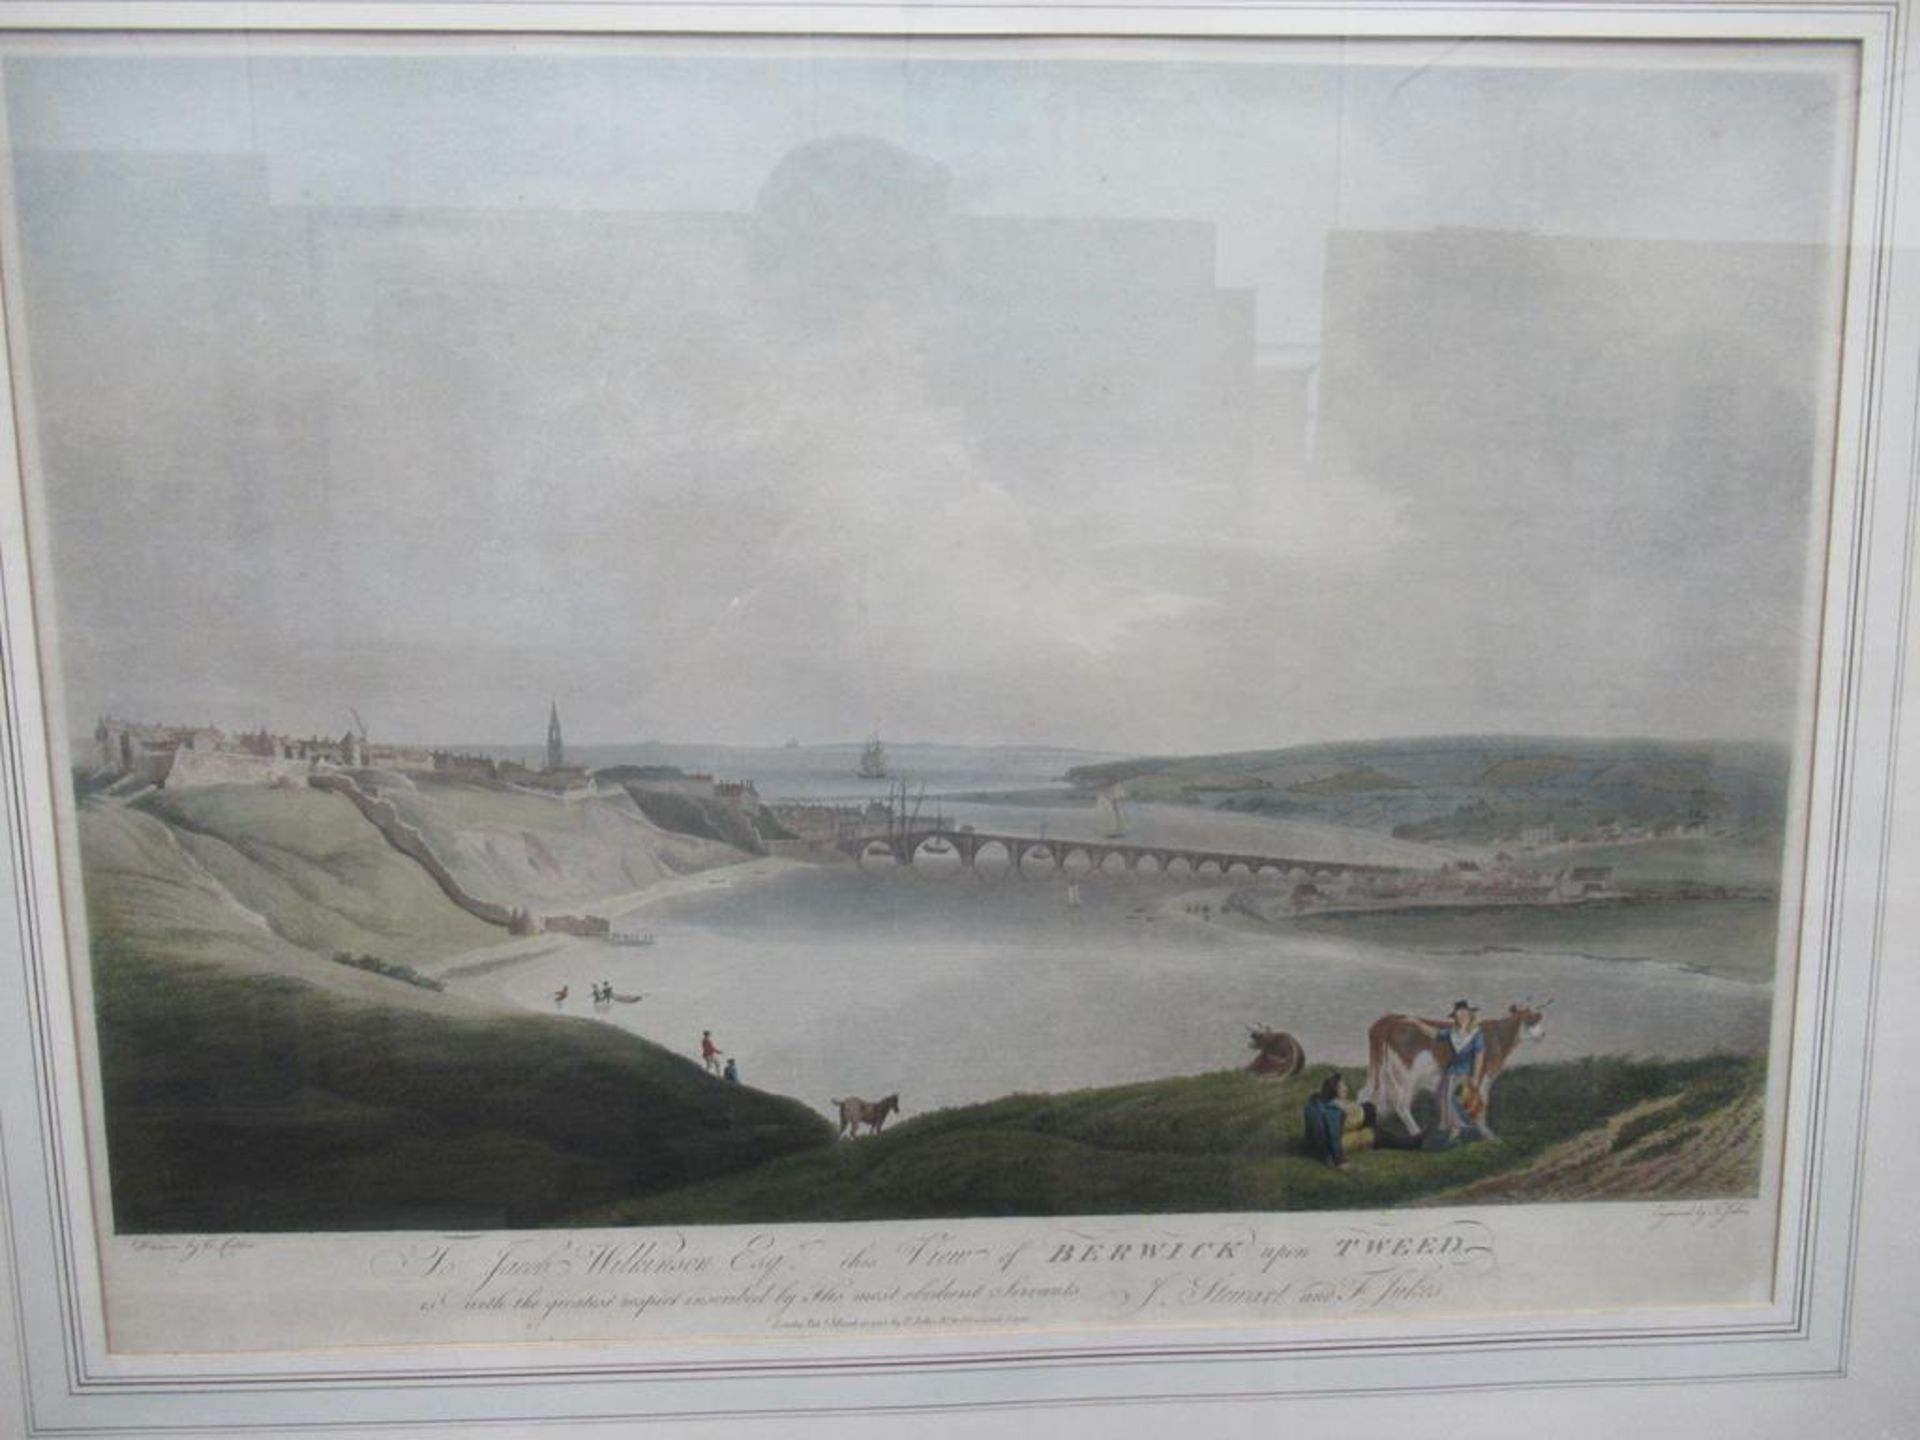 Lithograph of Berwick Upon Tweed Drawn by C.Latton (45cm x 60cm) - Image 2 of 4